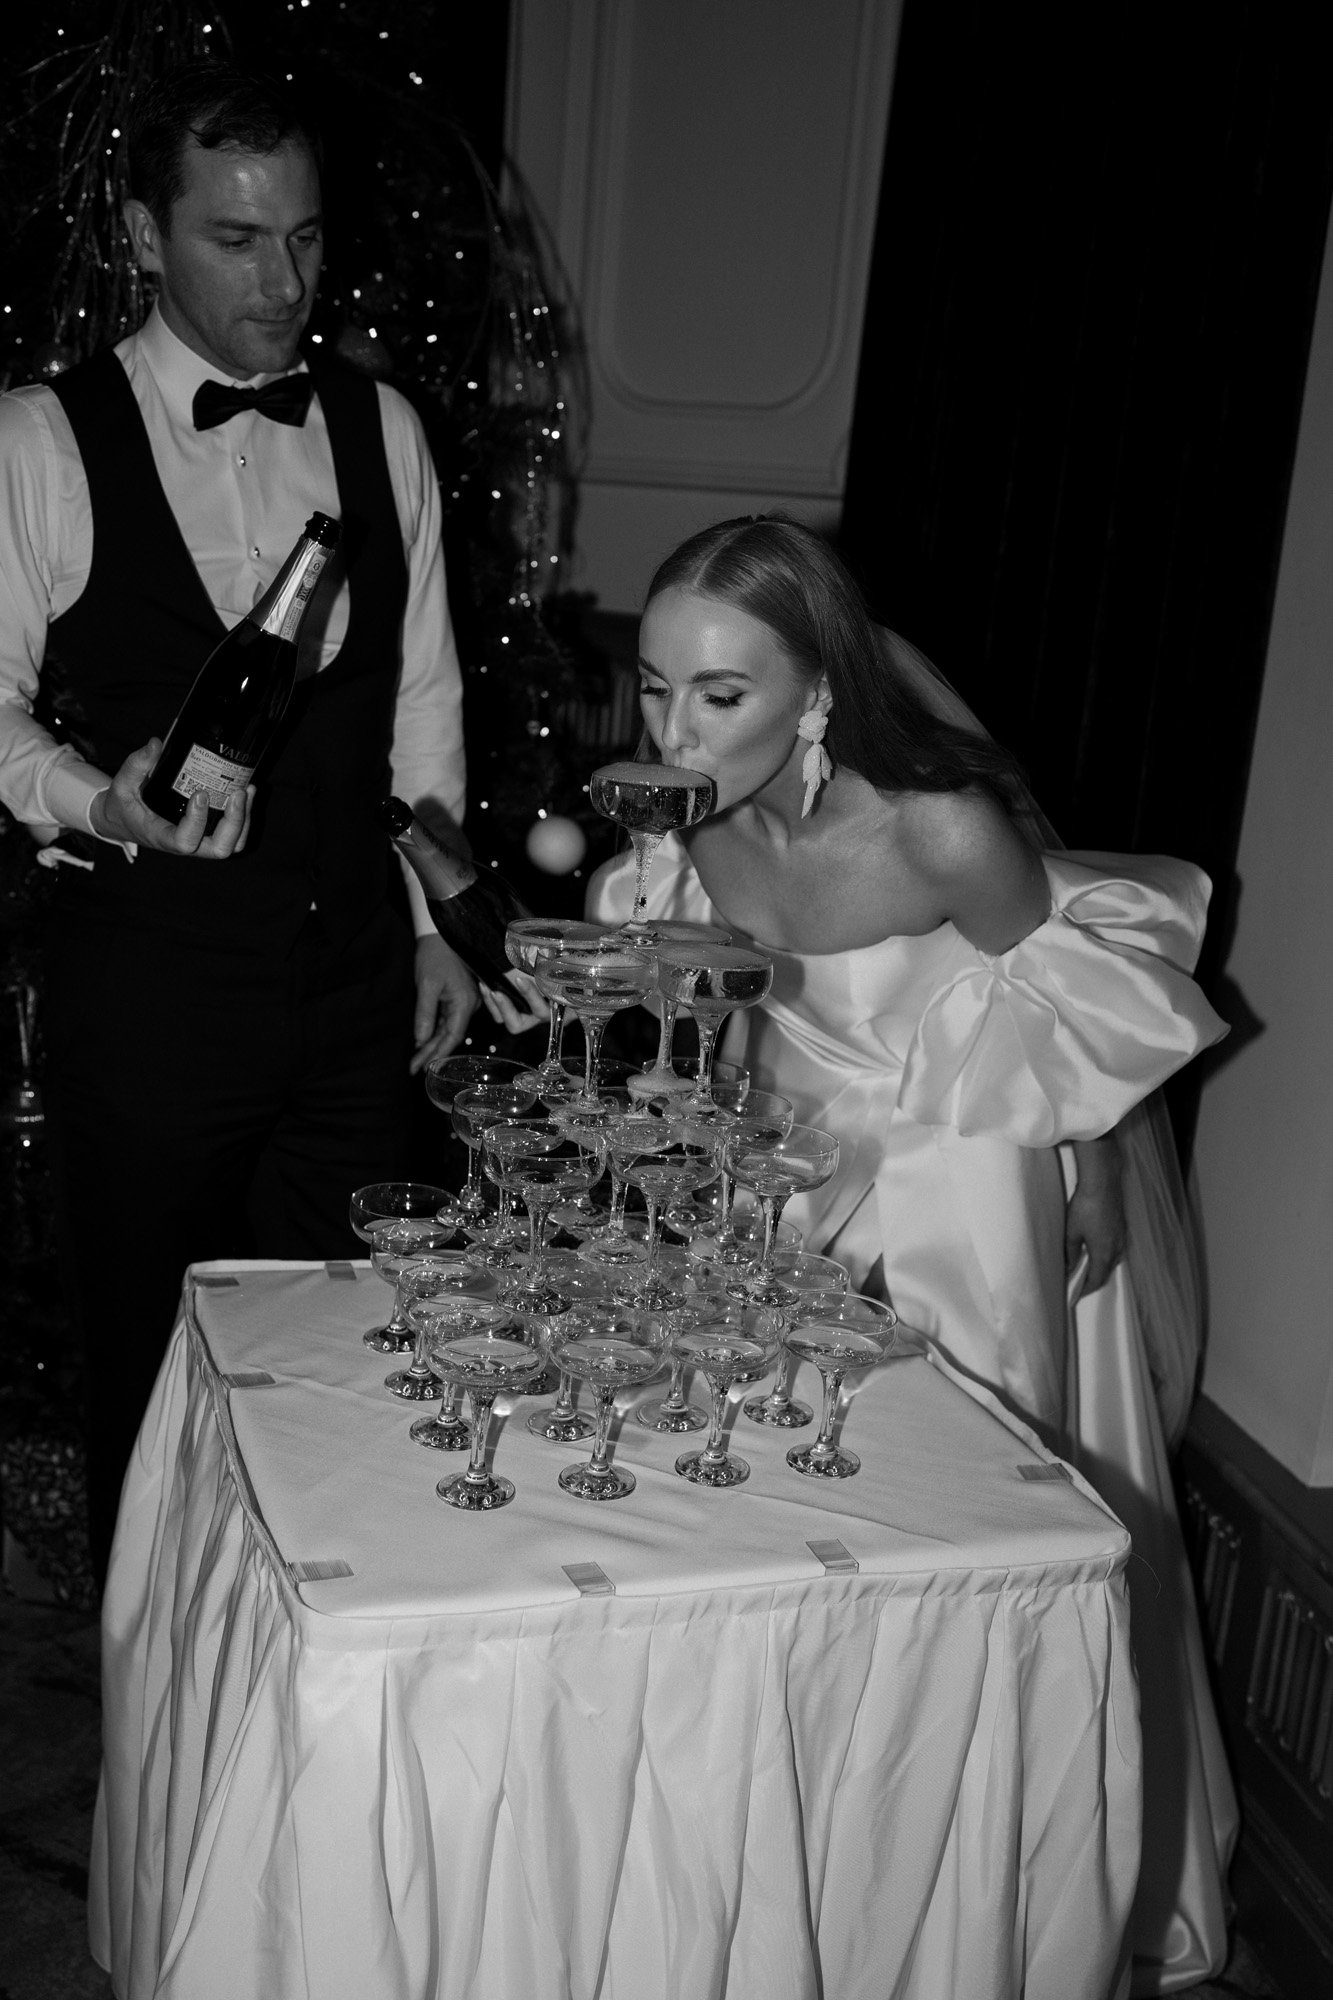 a modern champagne tower being poured by the groom as the bride sips playfully from a coupe wearing her strapless silk ball gown by alena leena and abellie earrings.